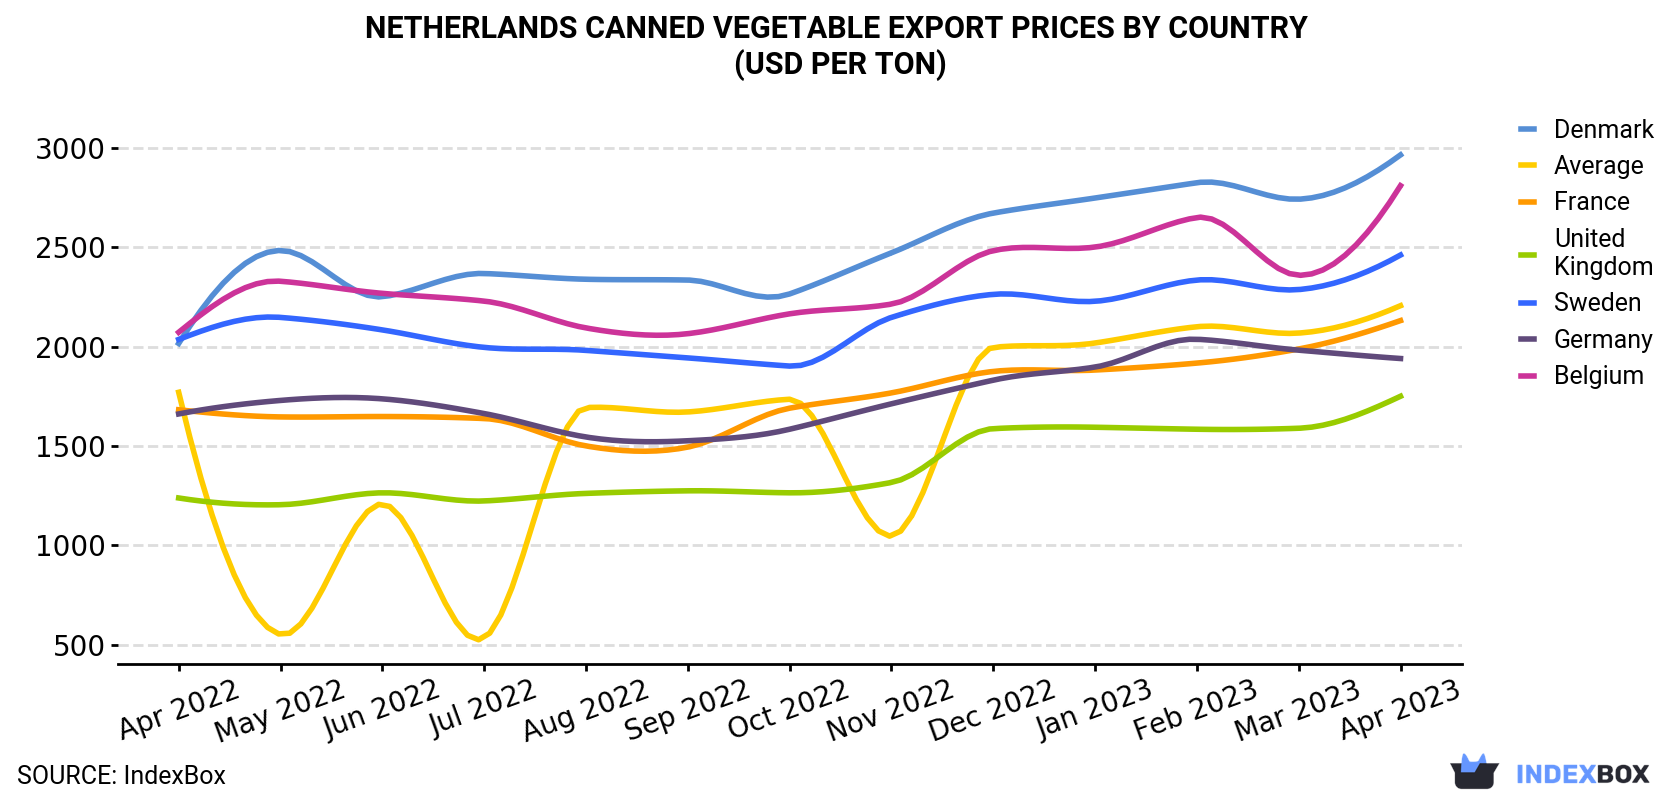 Netherlands Canned Vegetable Export Prices By Country (USD Per Ton)